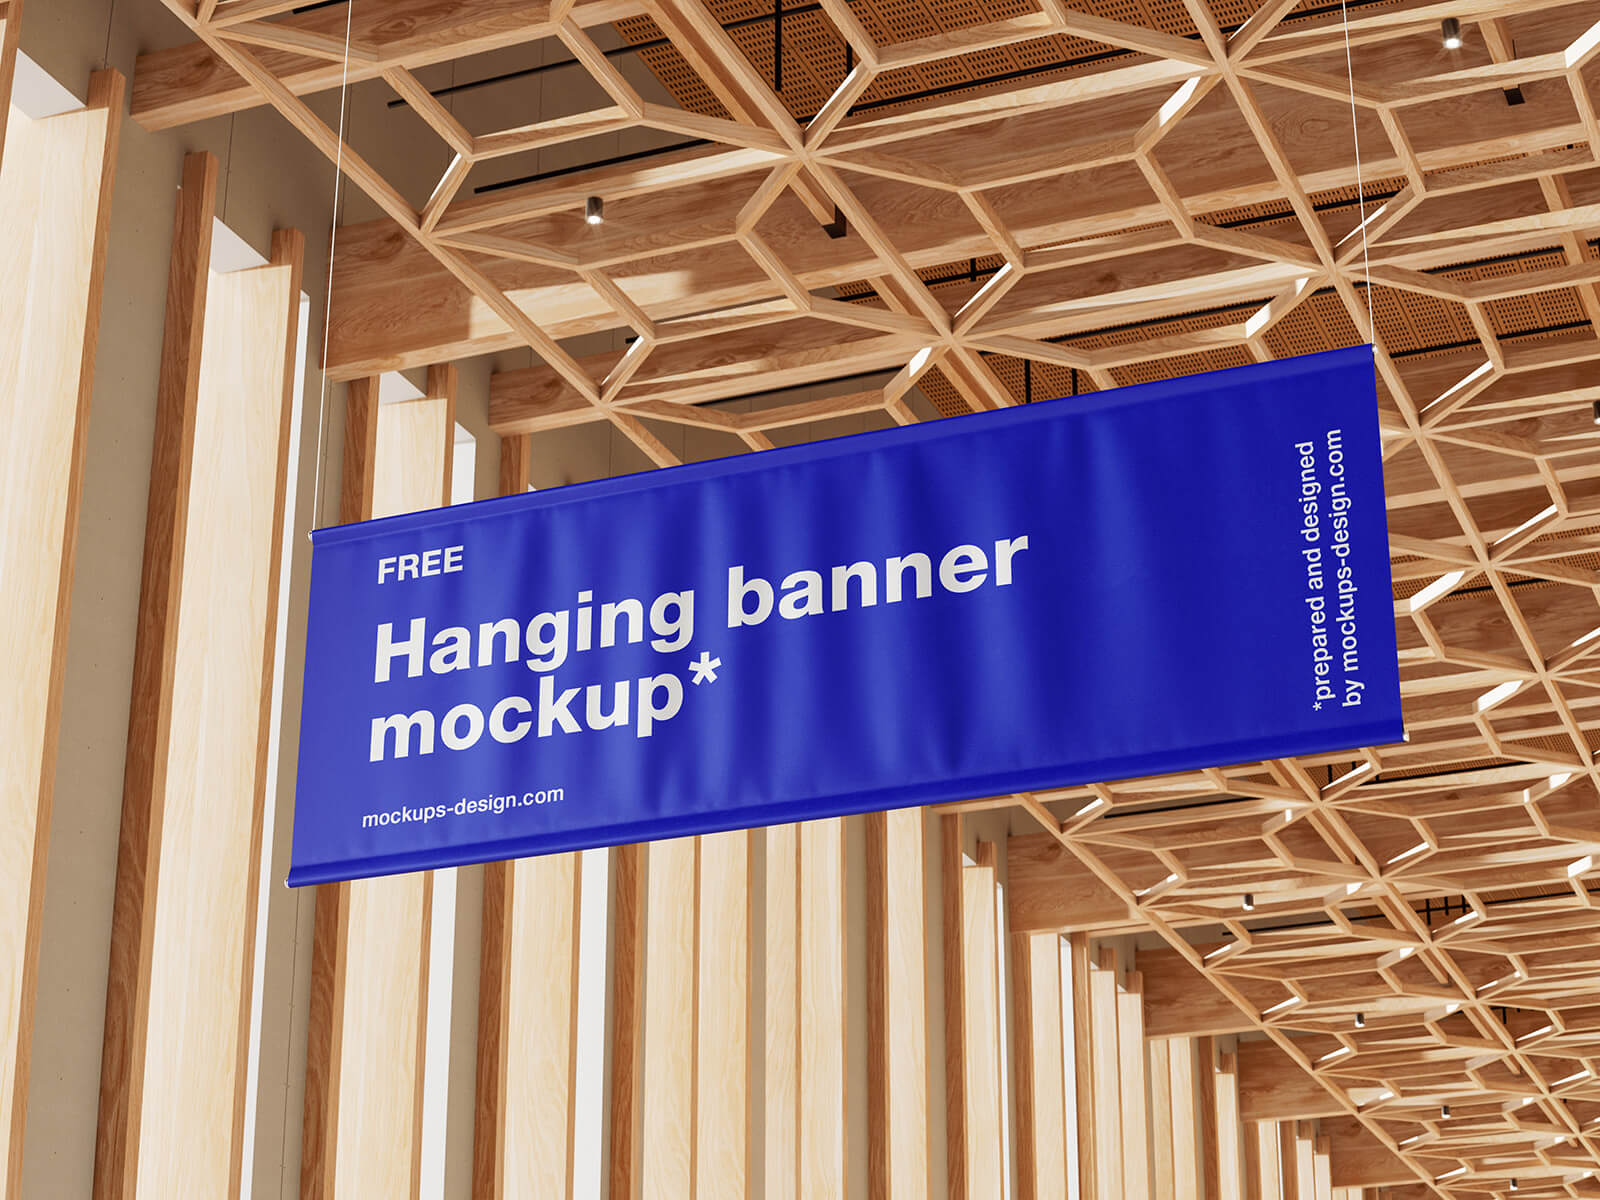 3 Free Expo Hall Ceiling Hanging Banner Mockup PSD Files